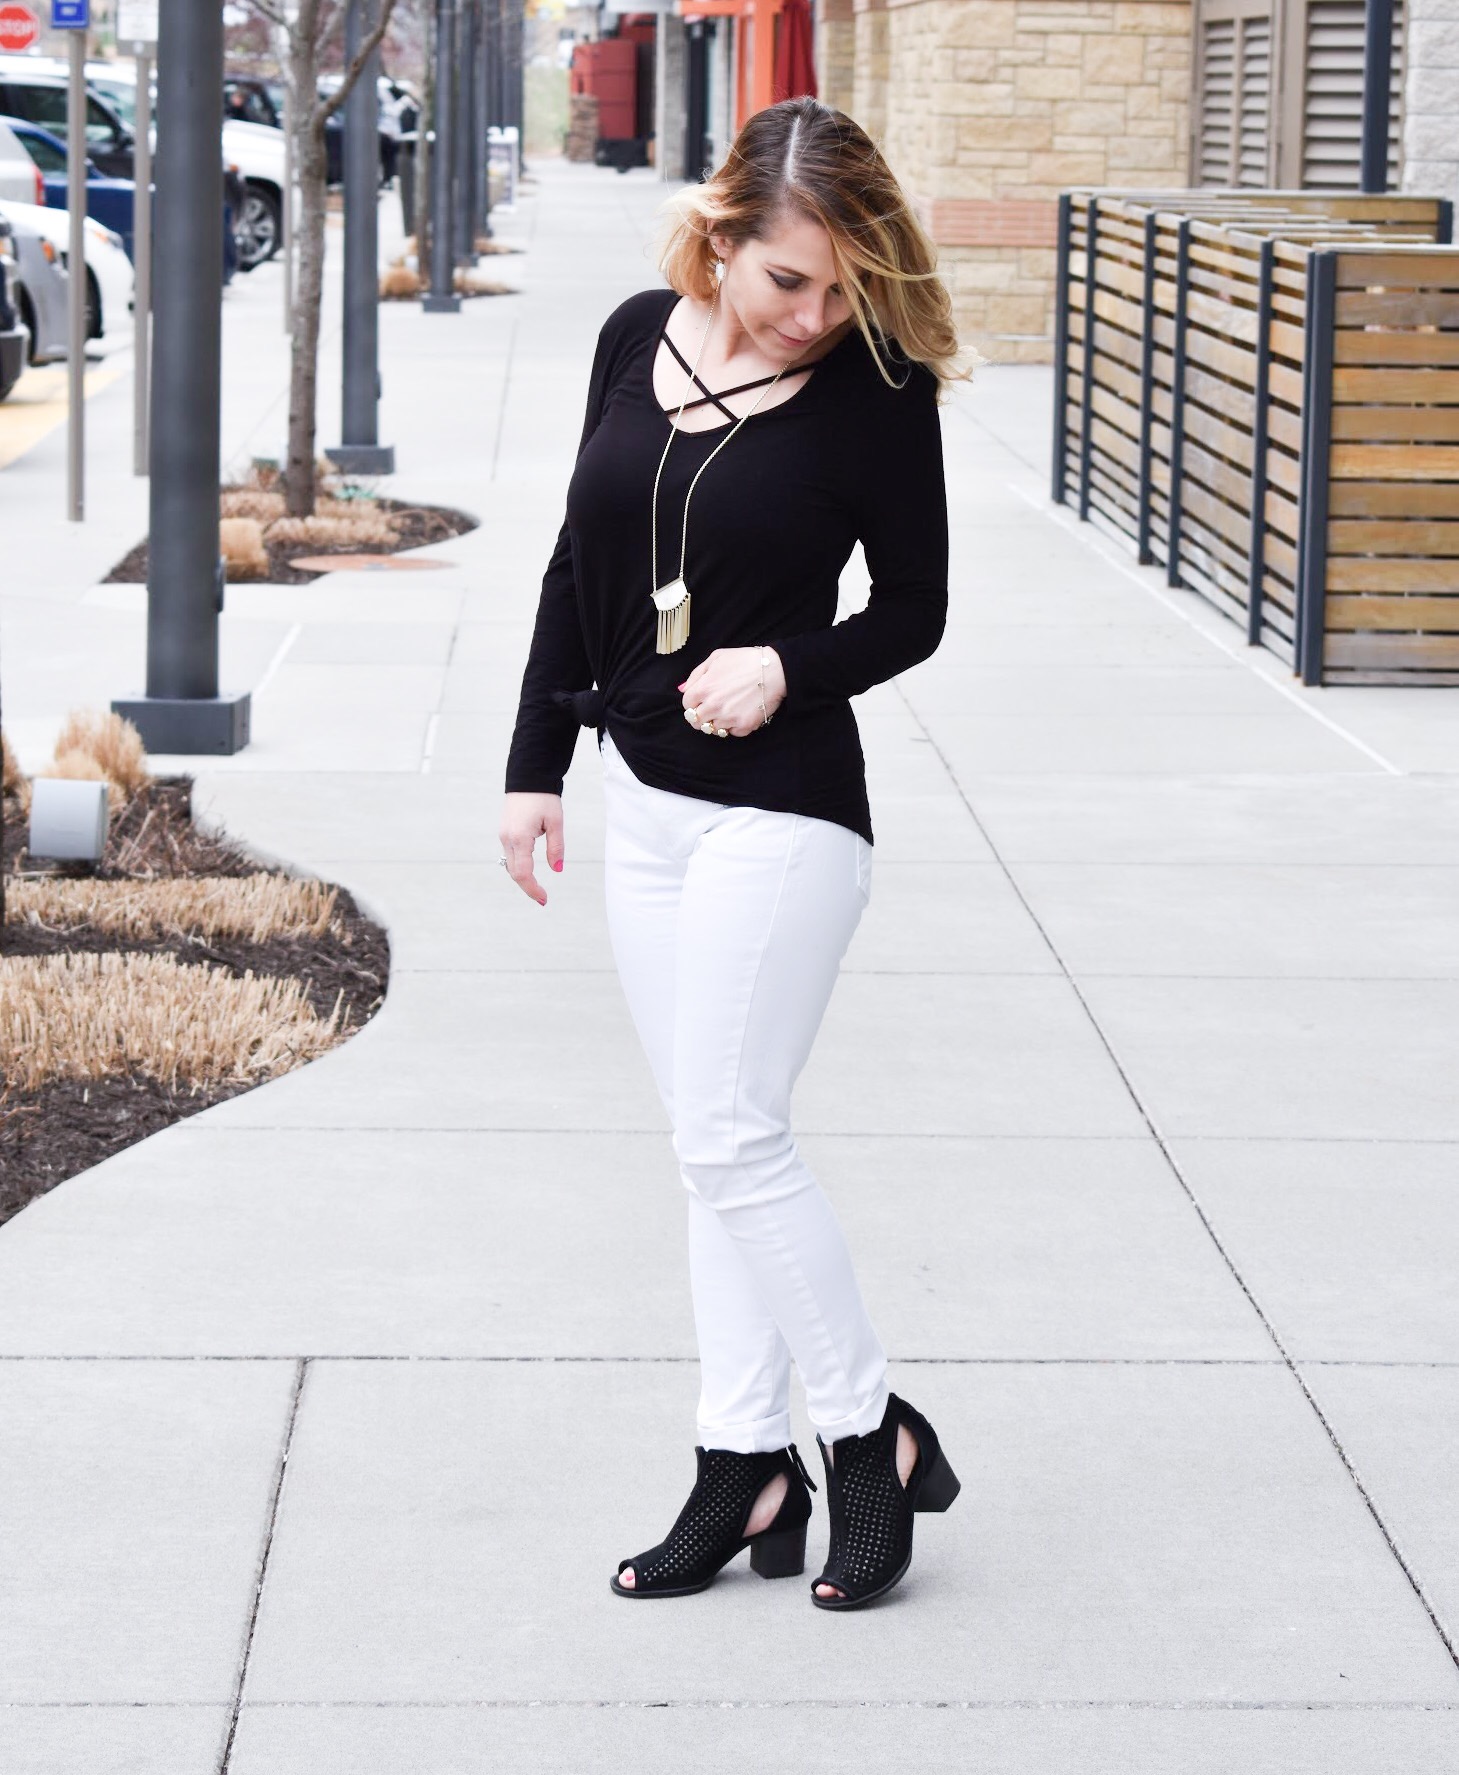 Monochrome Kendra Scott Jewelry Look: Kansas City fashion blogger COVET by tricia showcases a black and white spring transitional spring style featuring Kendra Scott jewelry. Here's how to style a knotted blouse with white pants, peep-toe heels, and gorgeous jewelry from Kendra Scott. The jewelry used in this post is available from Threshing Bee in Overland Park, KS.